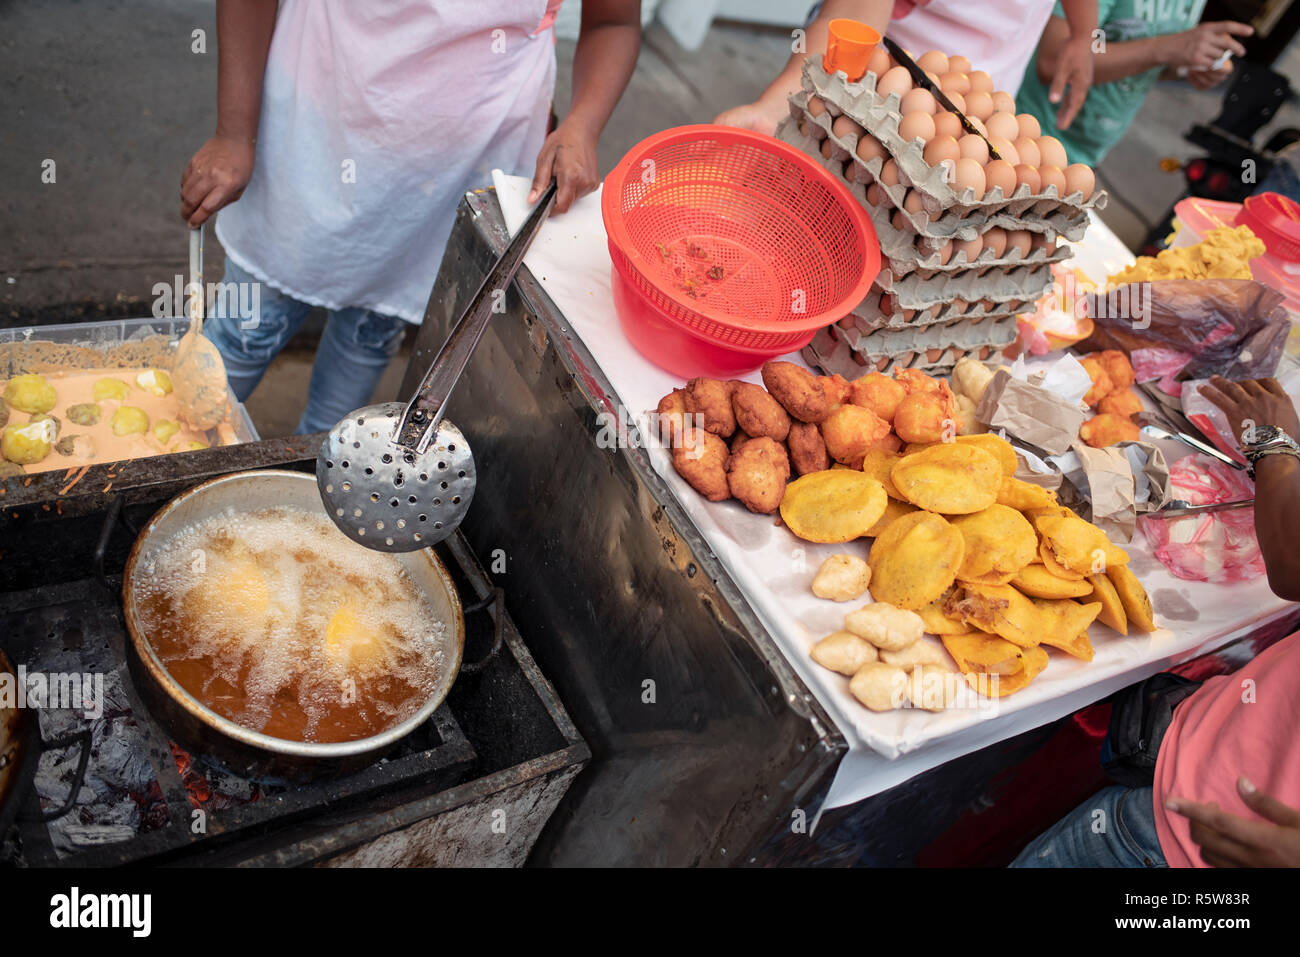 Fried street food in the making. Yuca, potato, patacones with costeño (plantains with soft cheese) and arepa with egg. Cartagena de Indias, Colombia Stock Photo